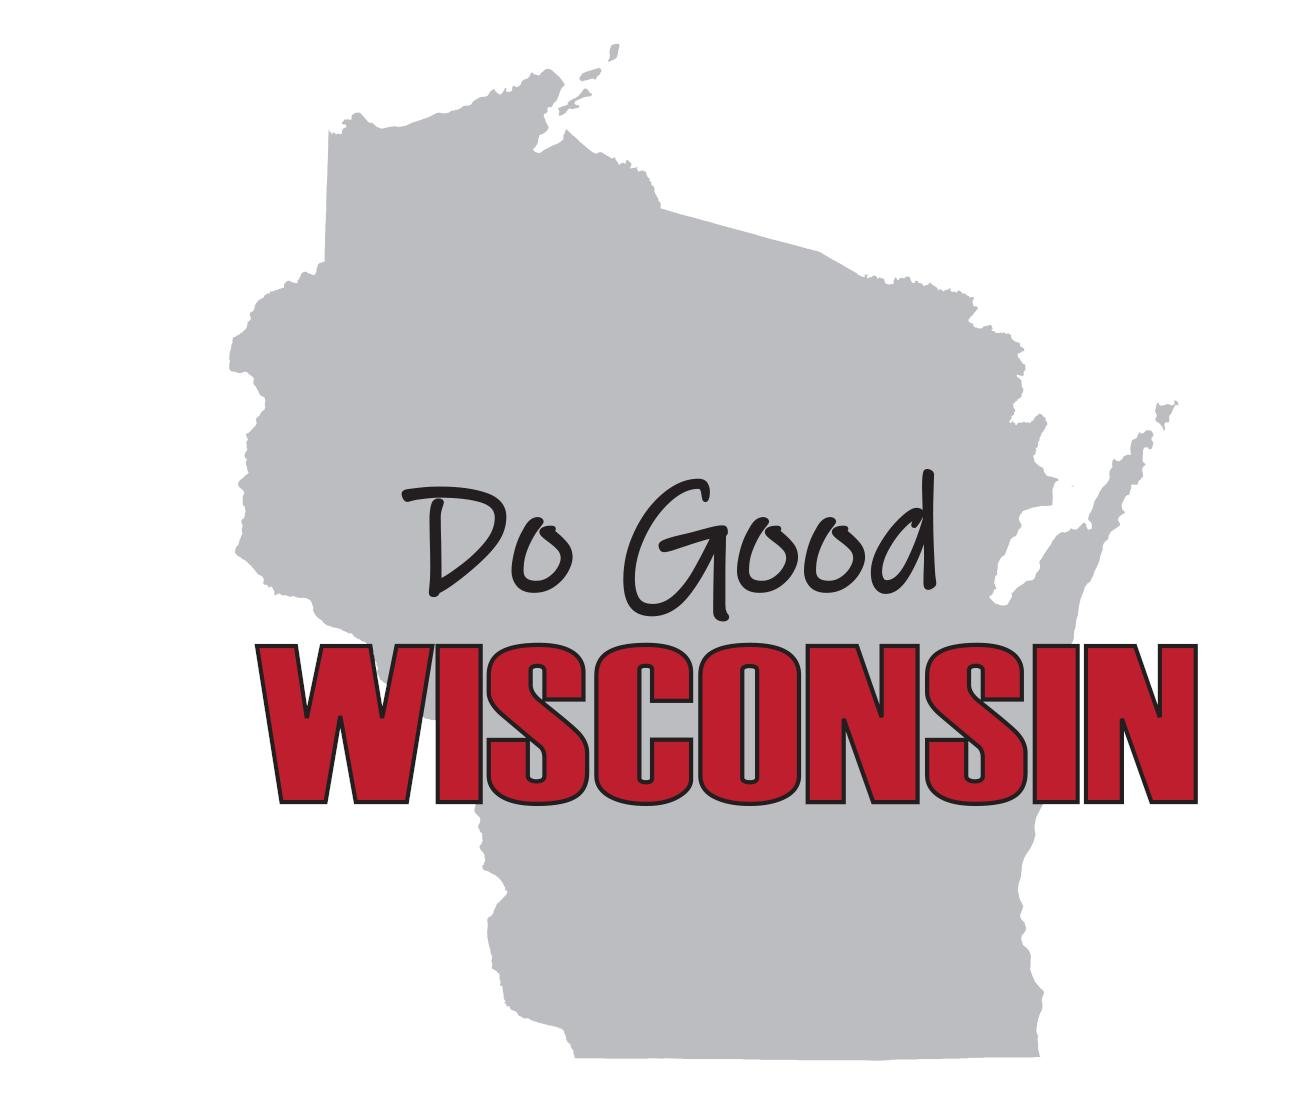 Do Good Wisconsin is a platform sharing inspiring content and showcasing individuals, organizations, and businesses 